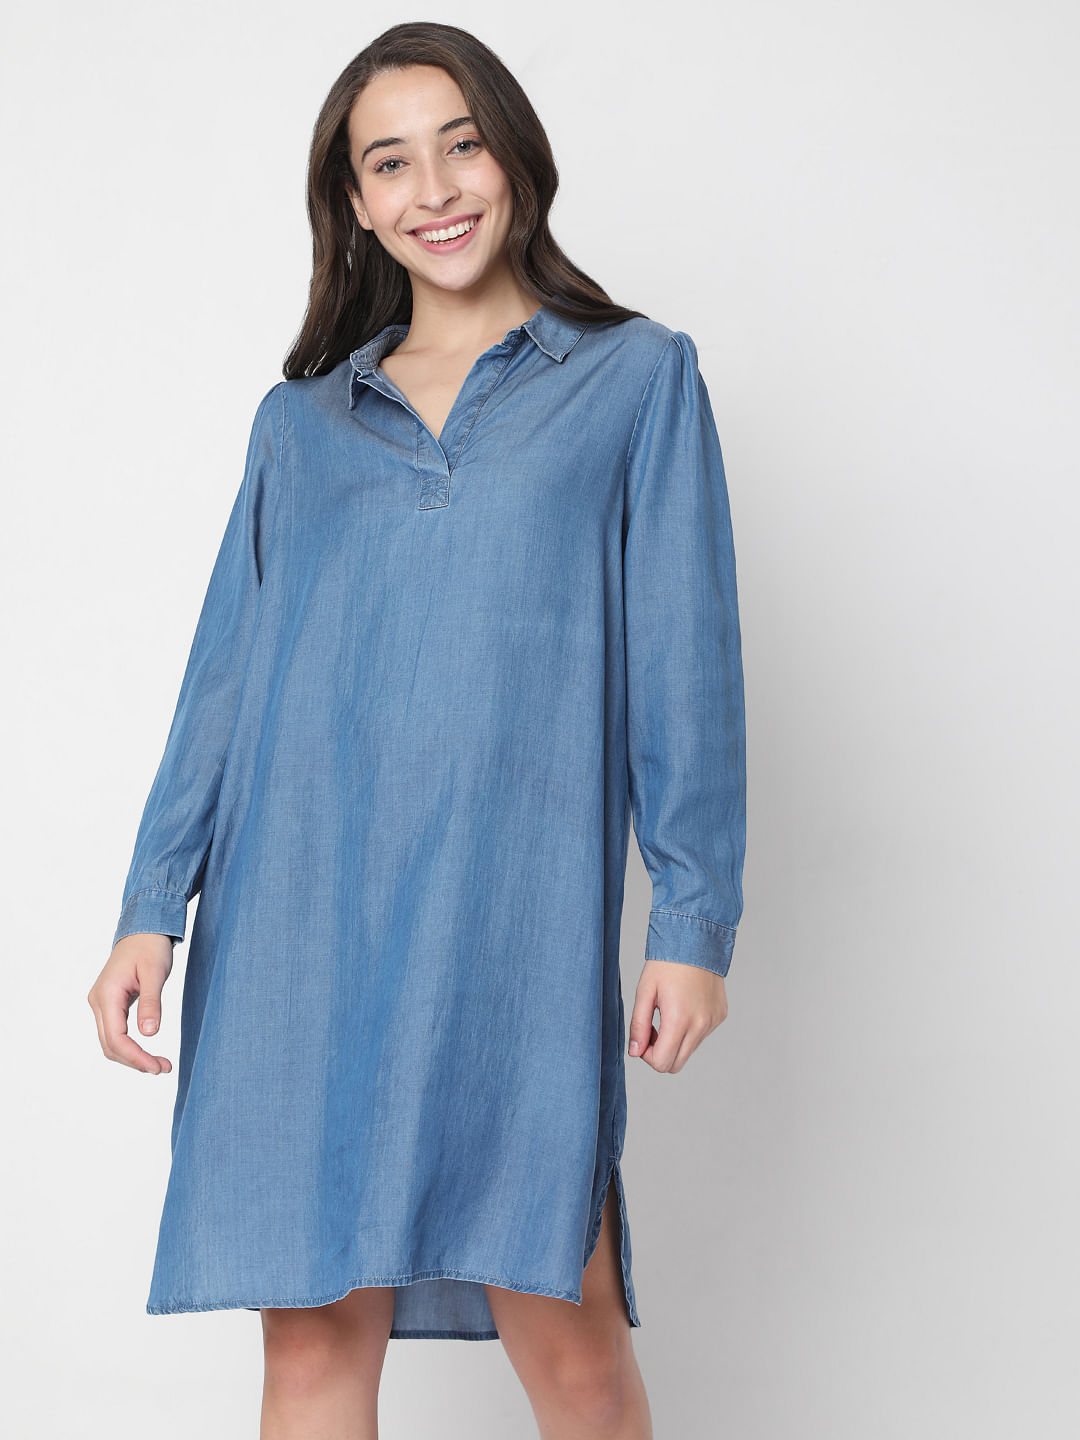 Buy Hive91 Sky Blue Long Shirt Dress for Women Made of Chambray Cotton at  Amazon.in